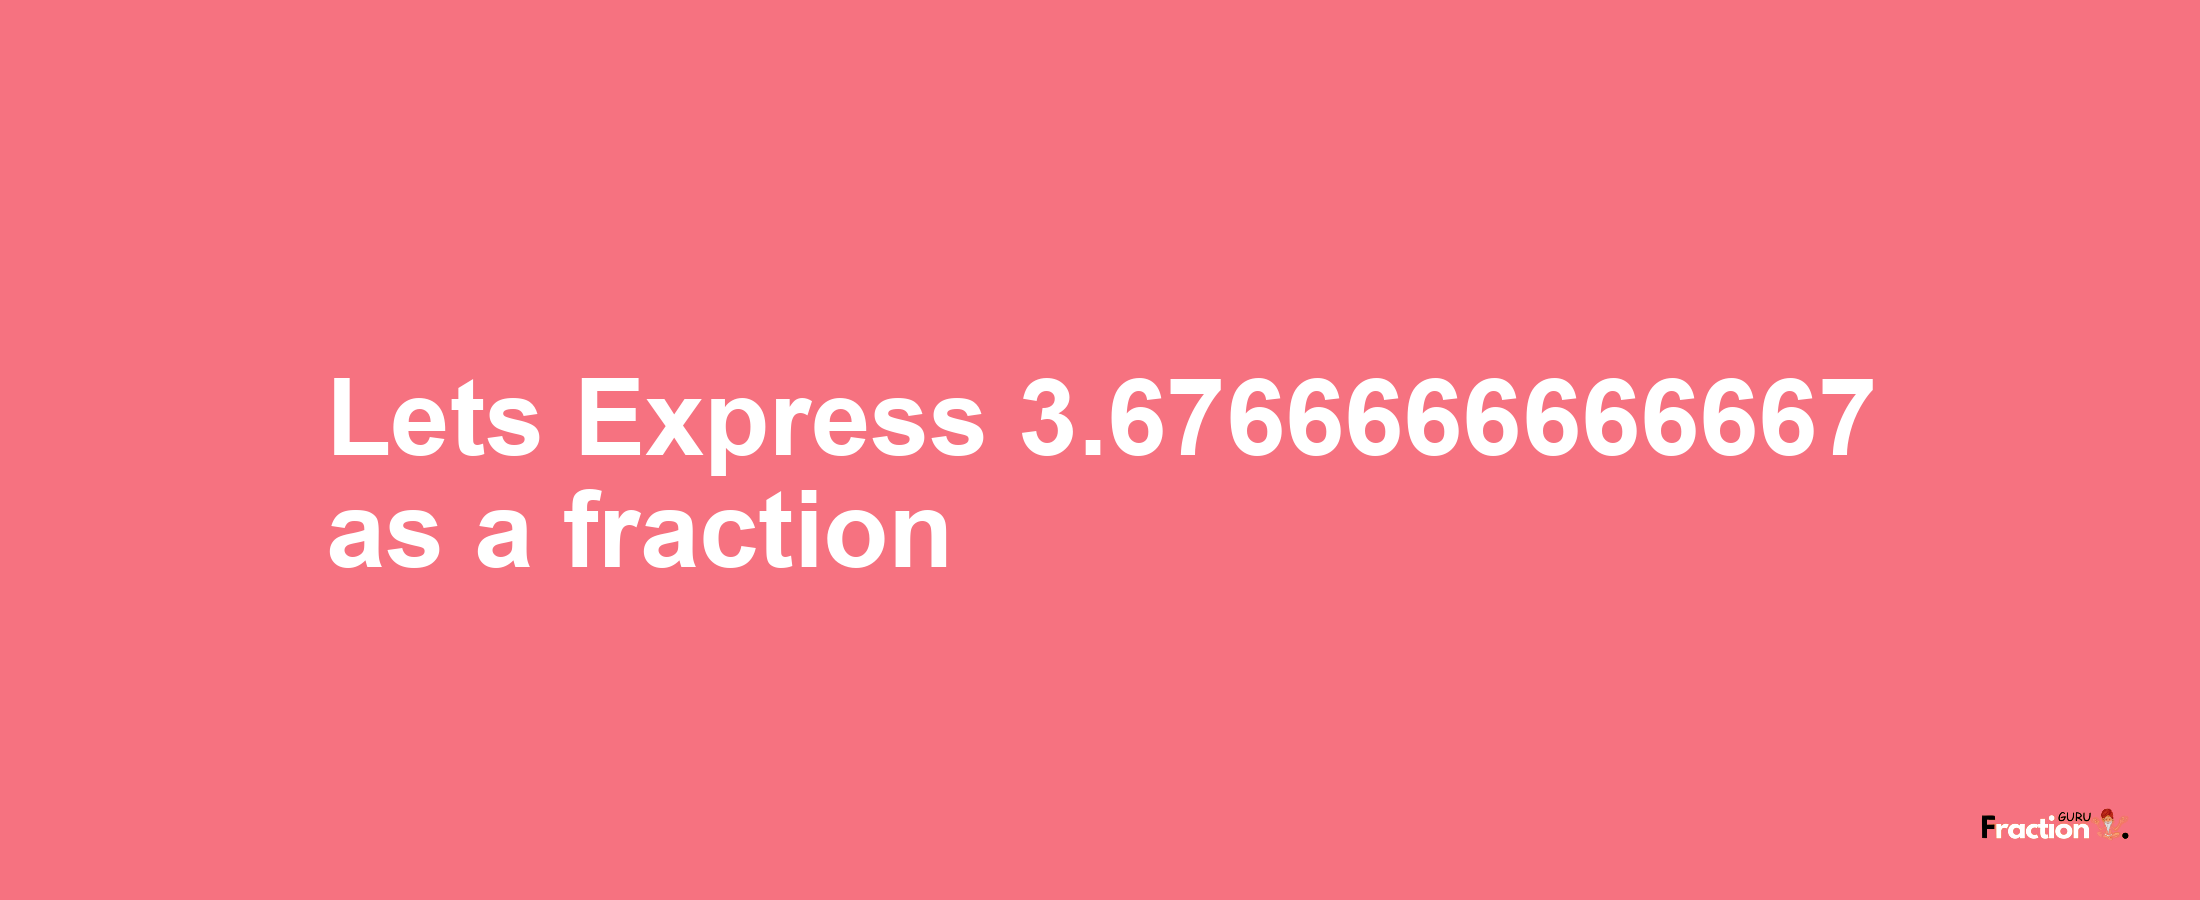 Lets Express 3.6766666666667 as afraction